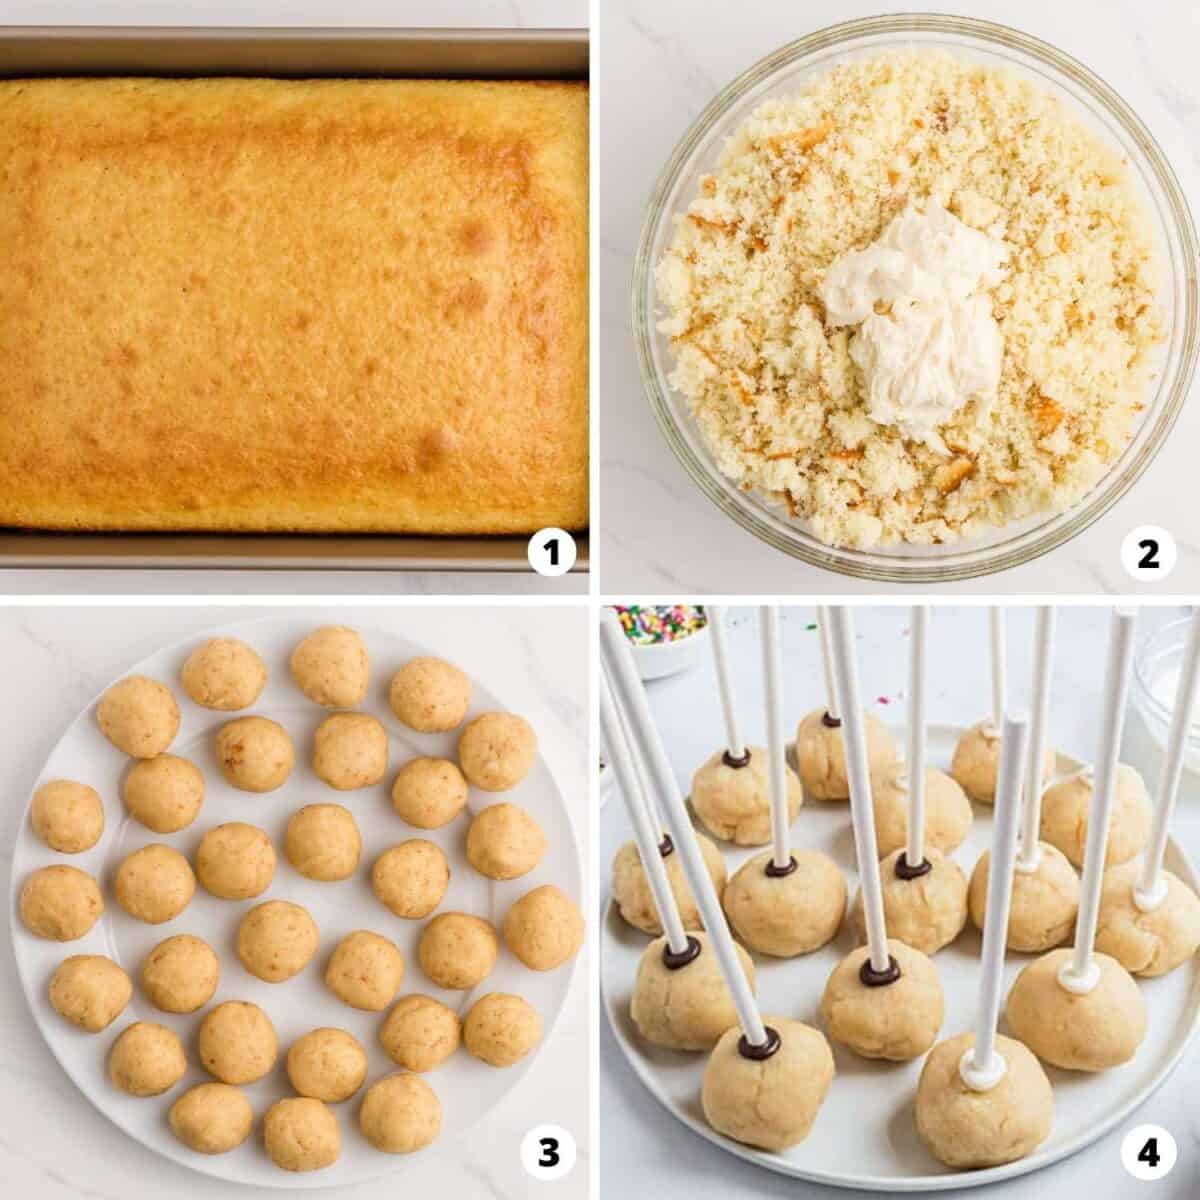 Showing how to make cake pops in a 4 step collage.